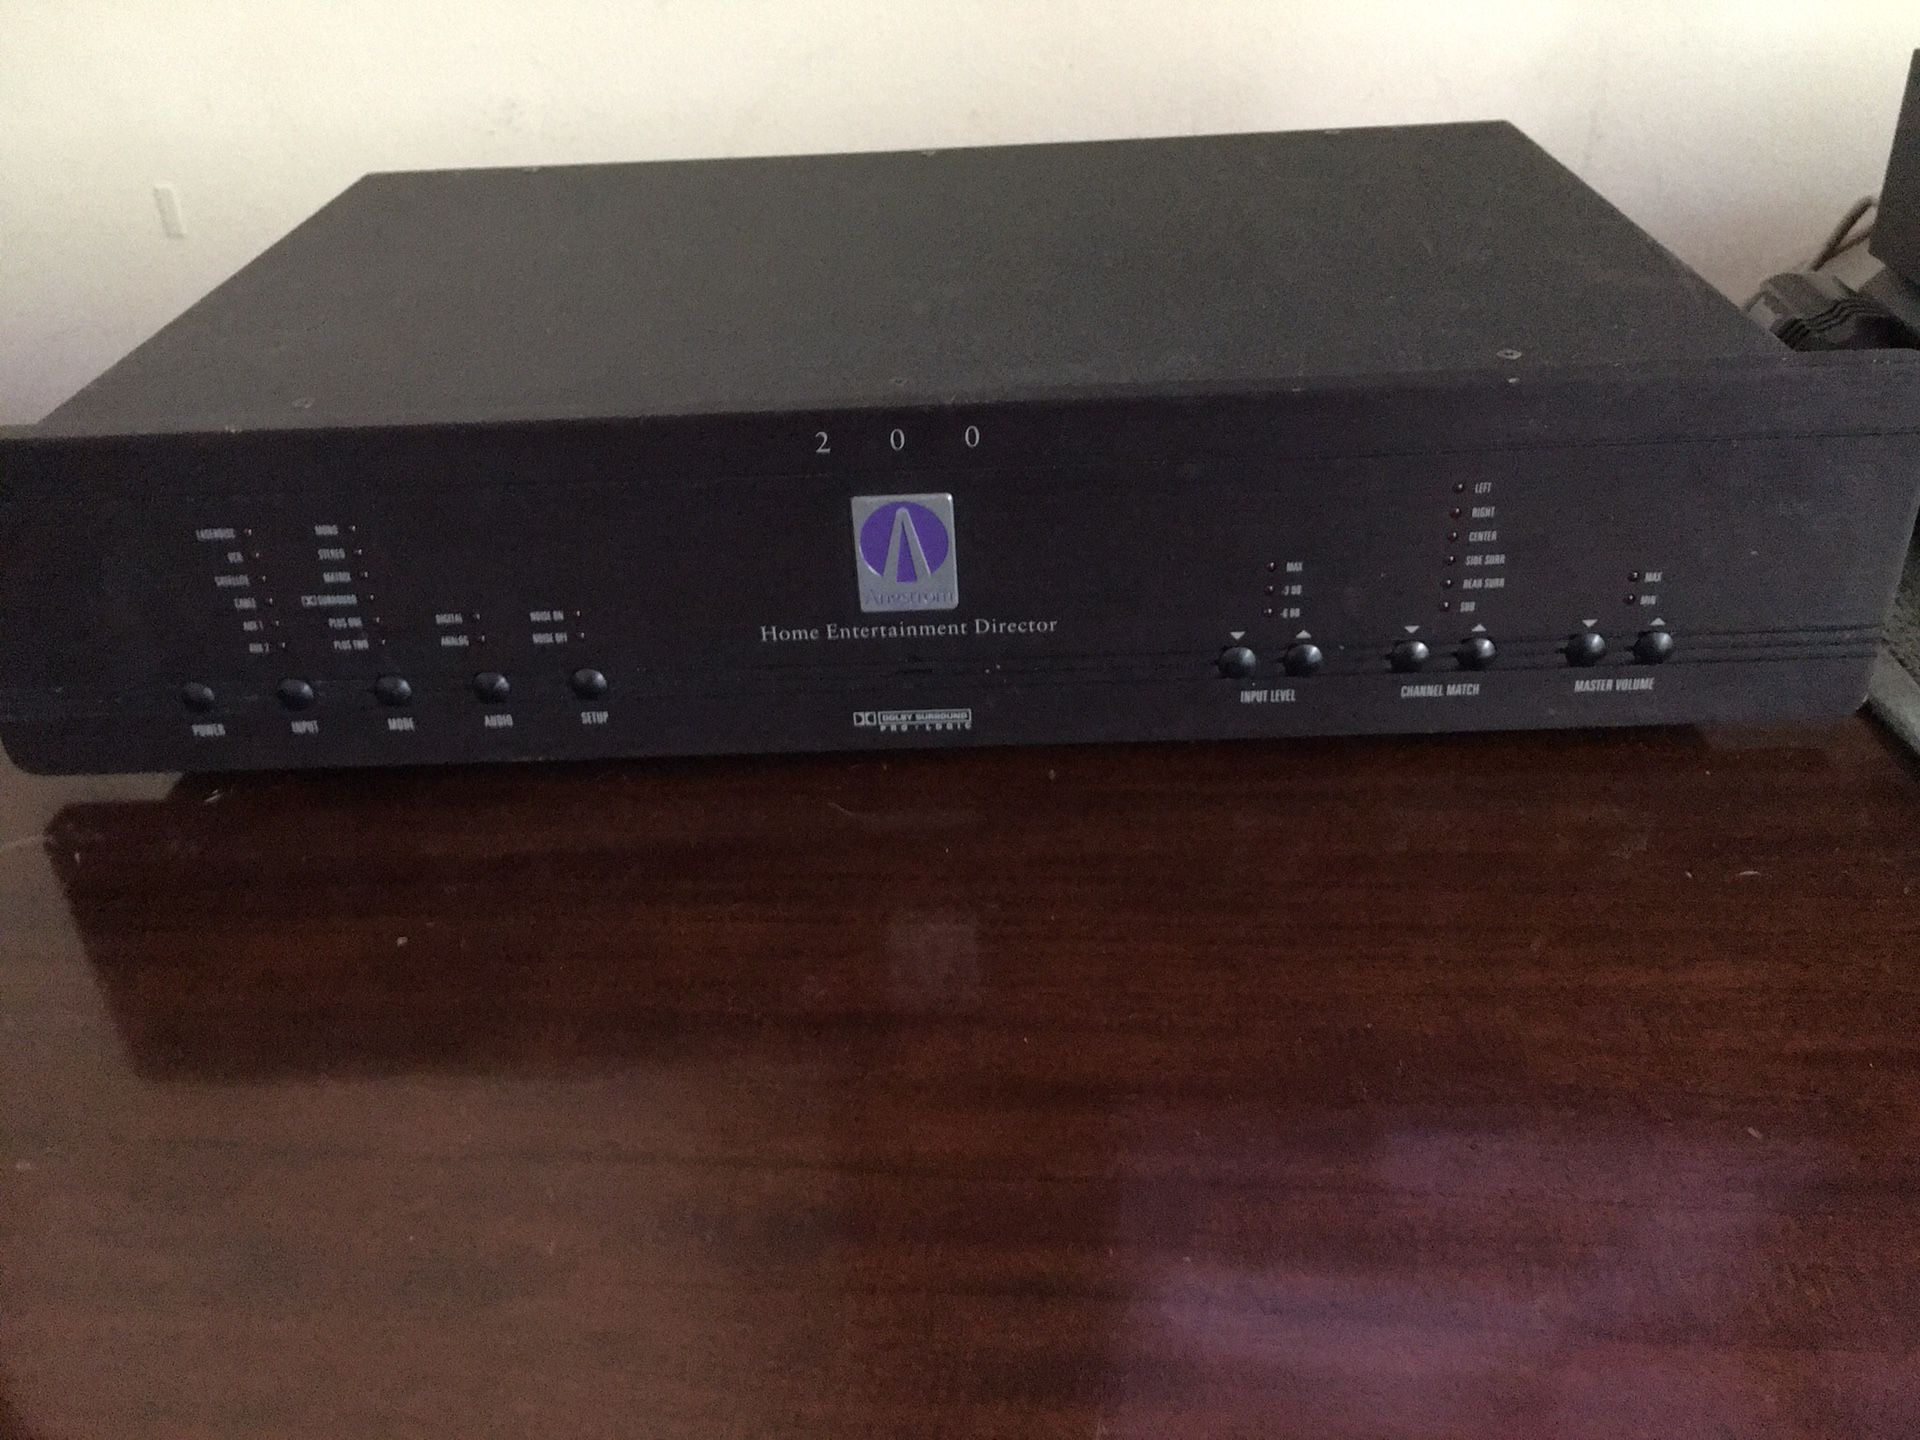 Angstrom 200 Preamplifier and Surround Processor